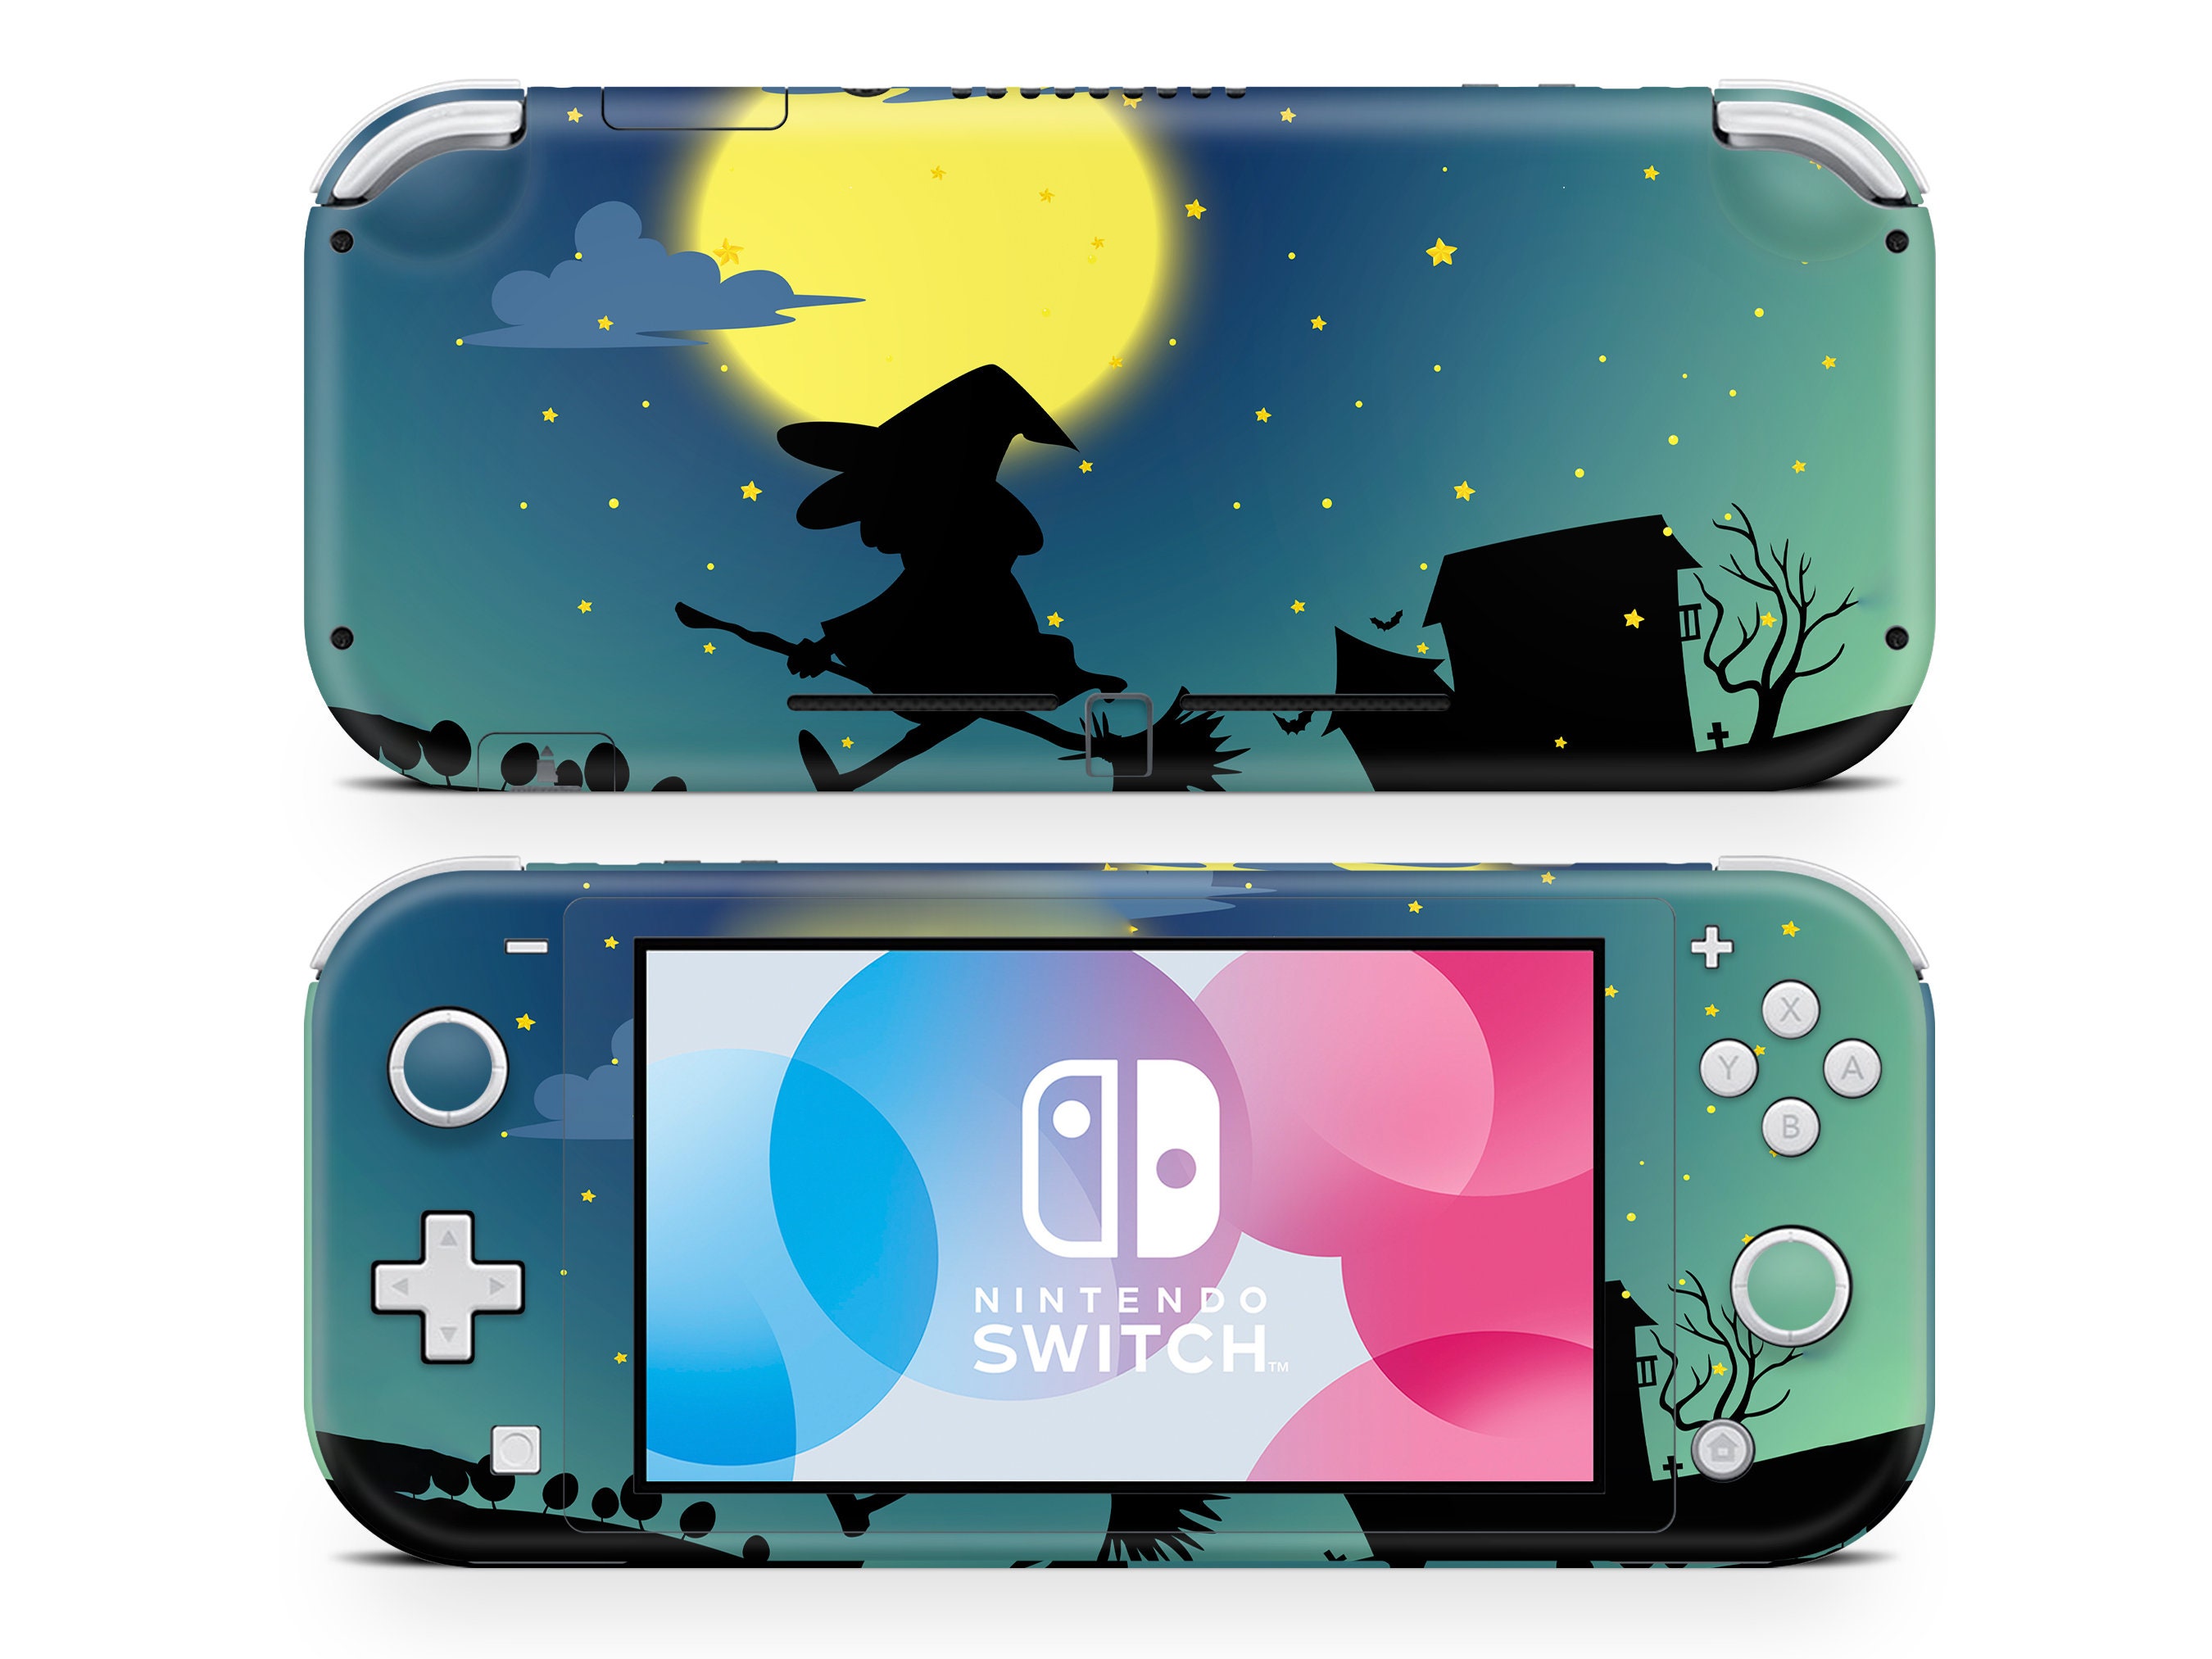 Nintendo Switch Lite Skin Decal for Game Console Magic Rainbow 